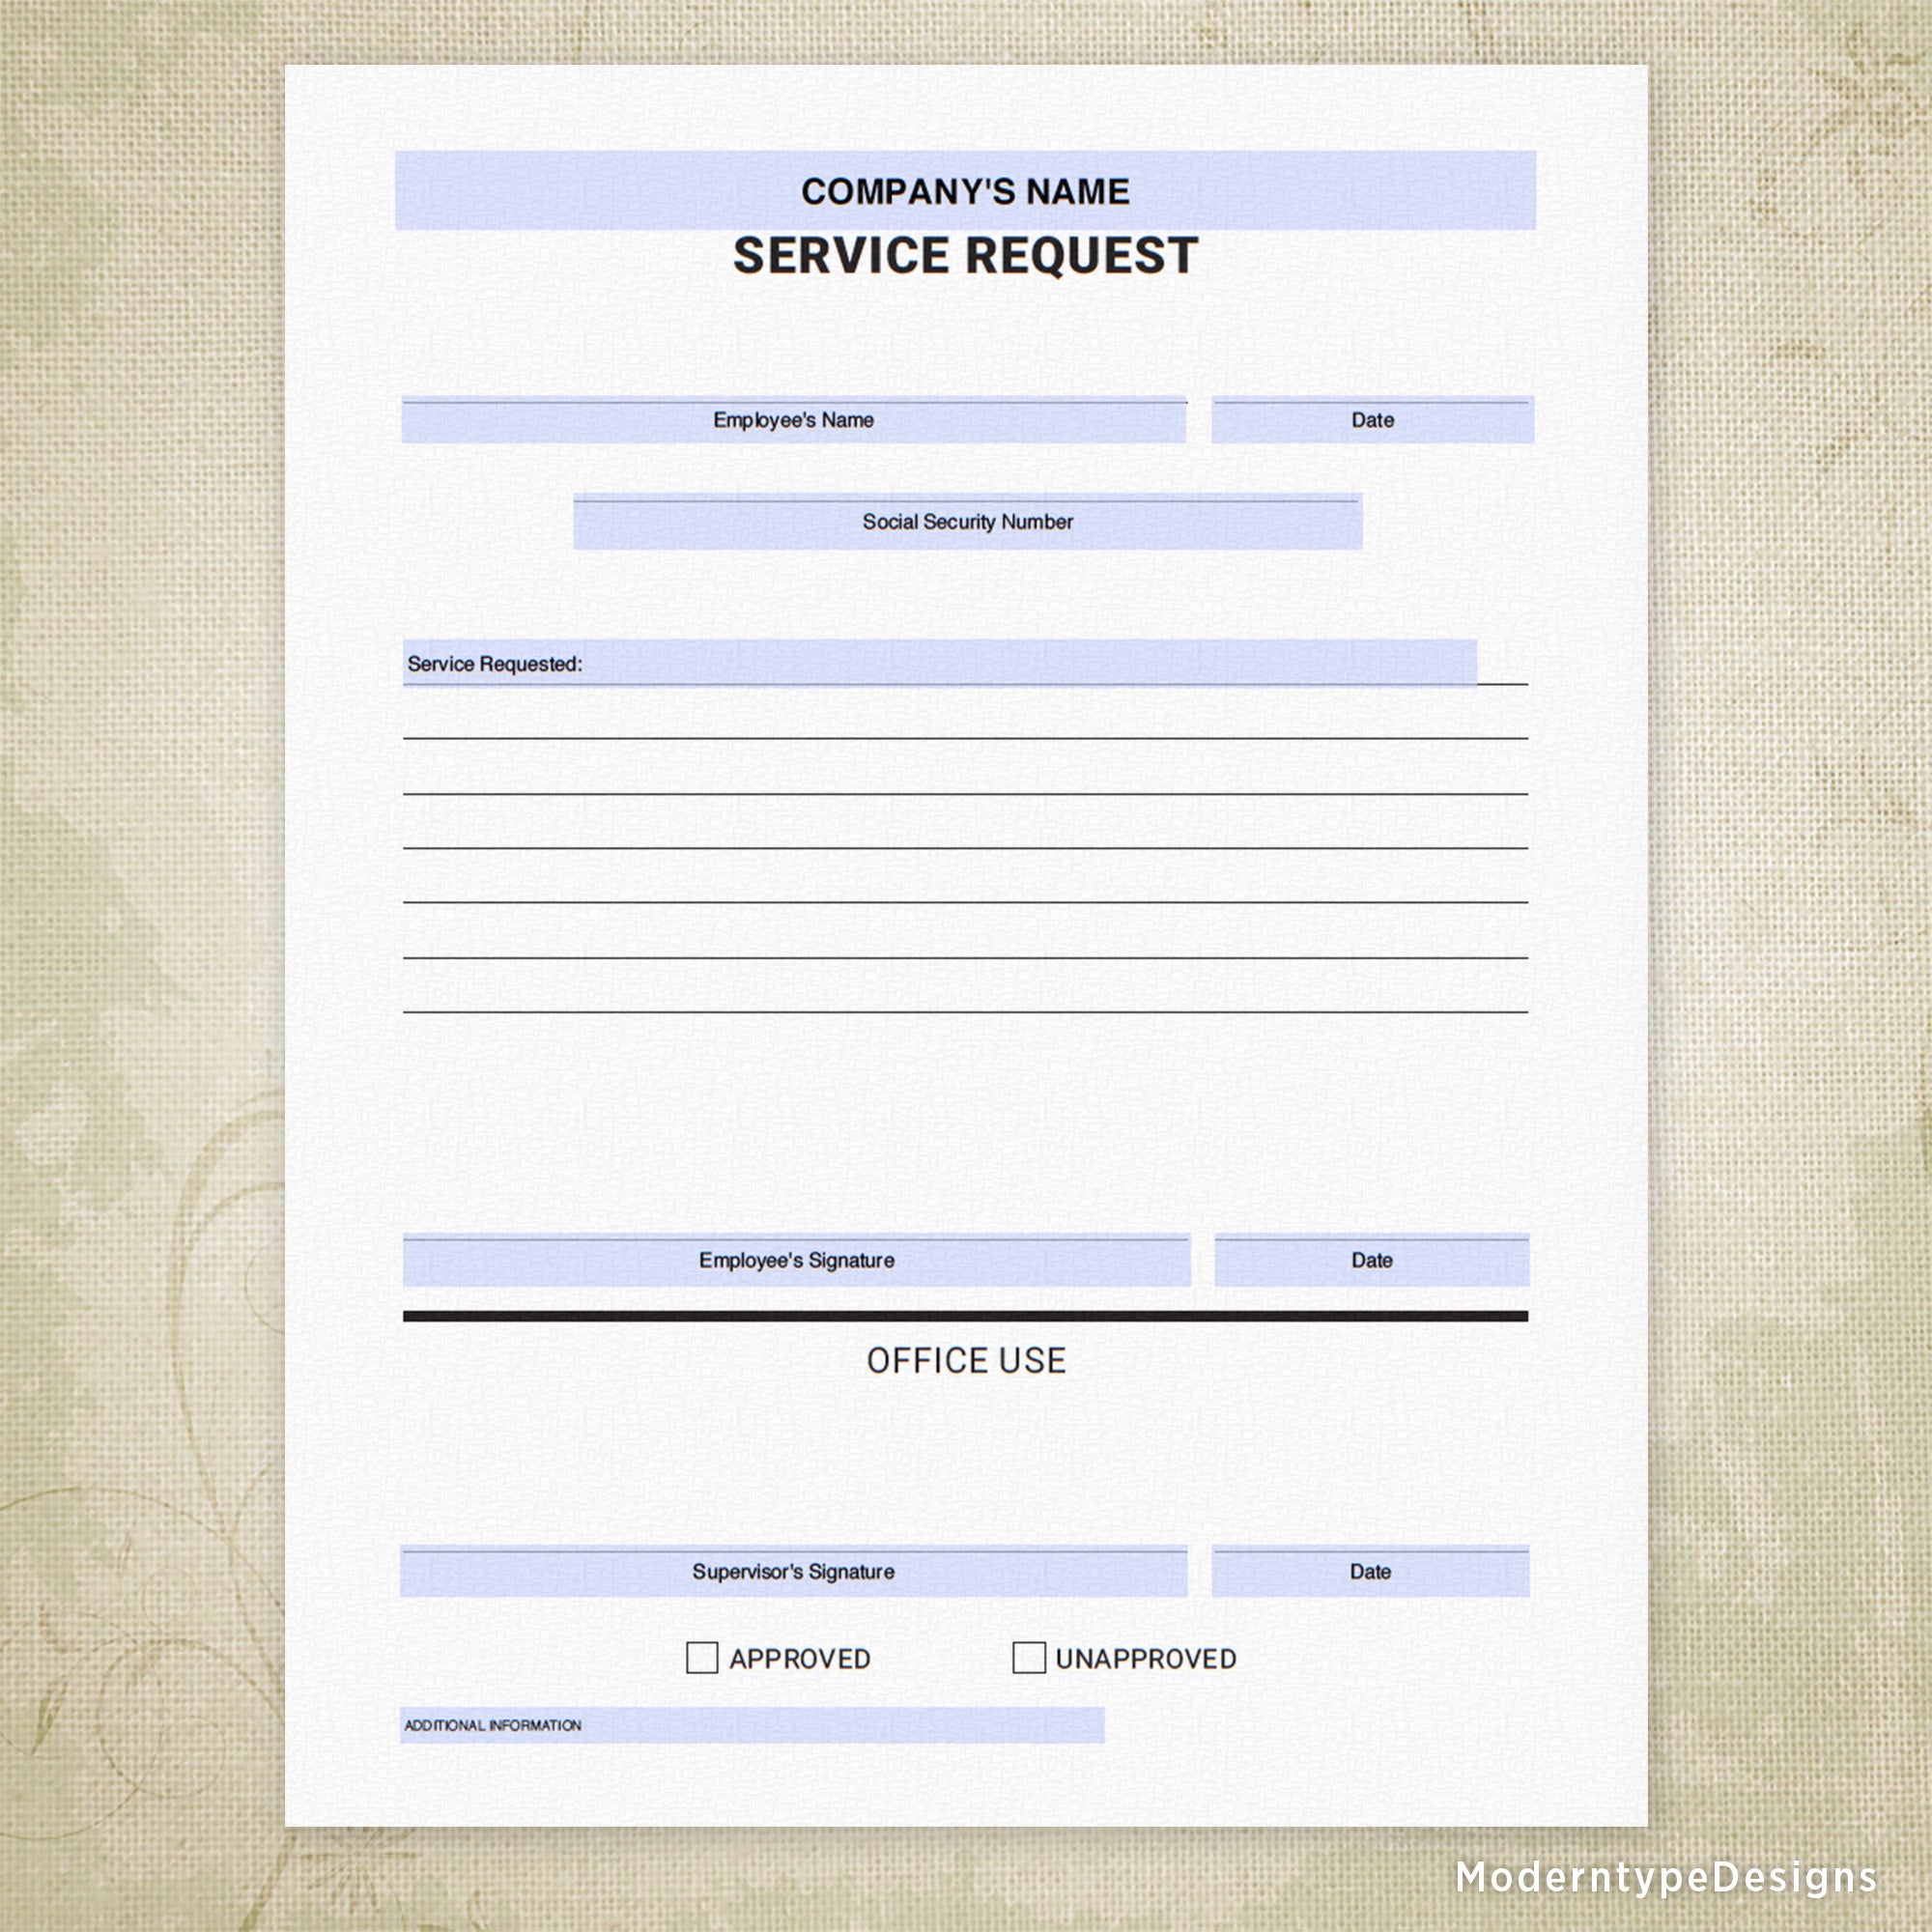 Service Request Printable Form for Business Boss, Personalized